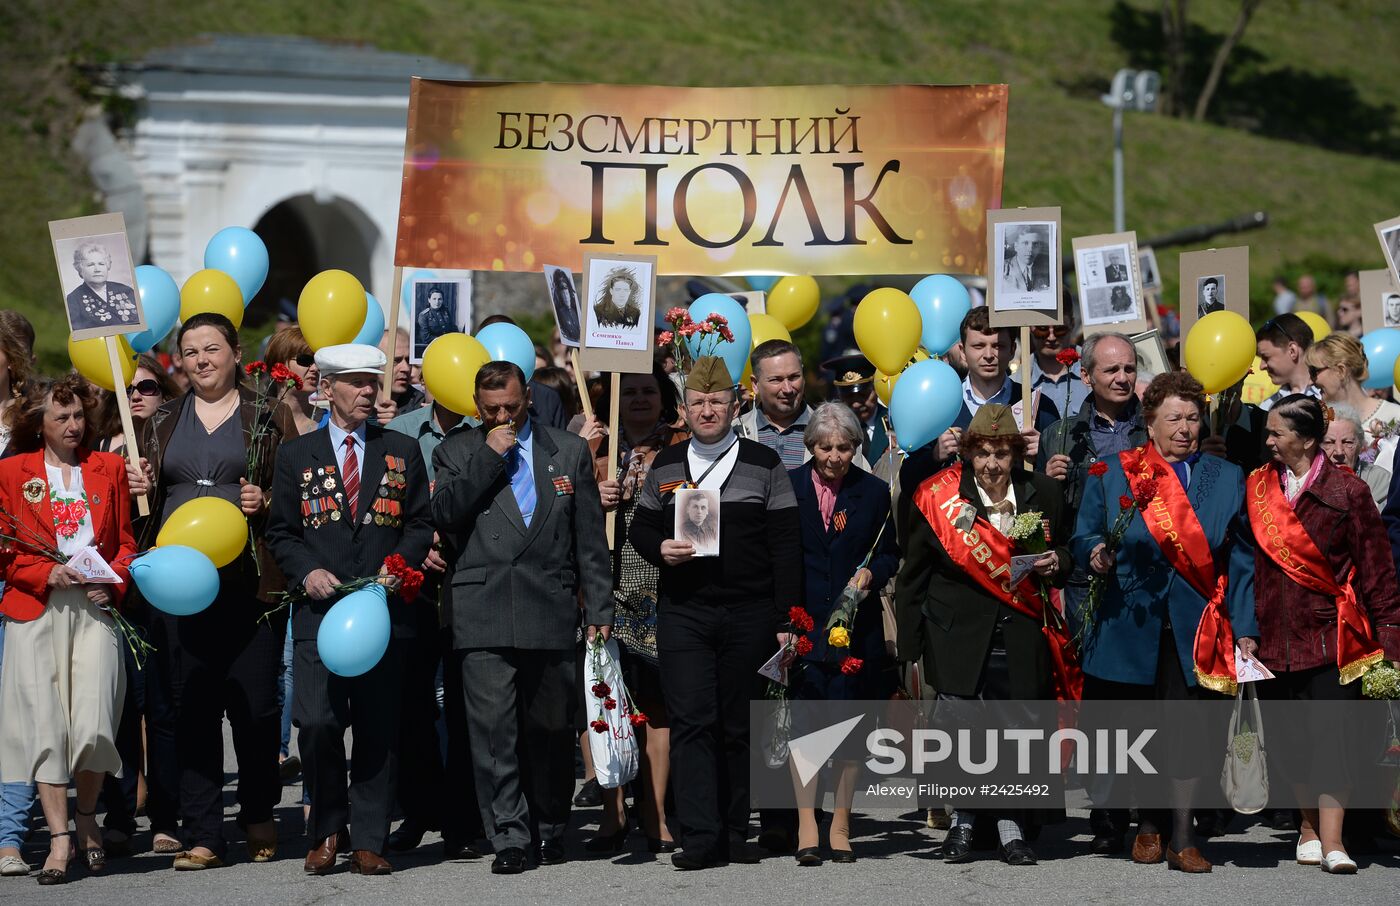 Victory Day events in Ukraine